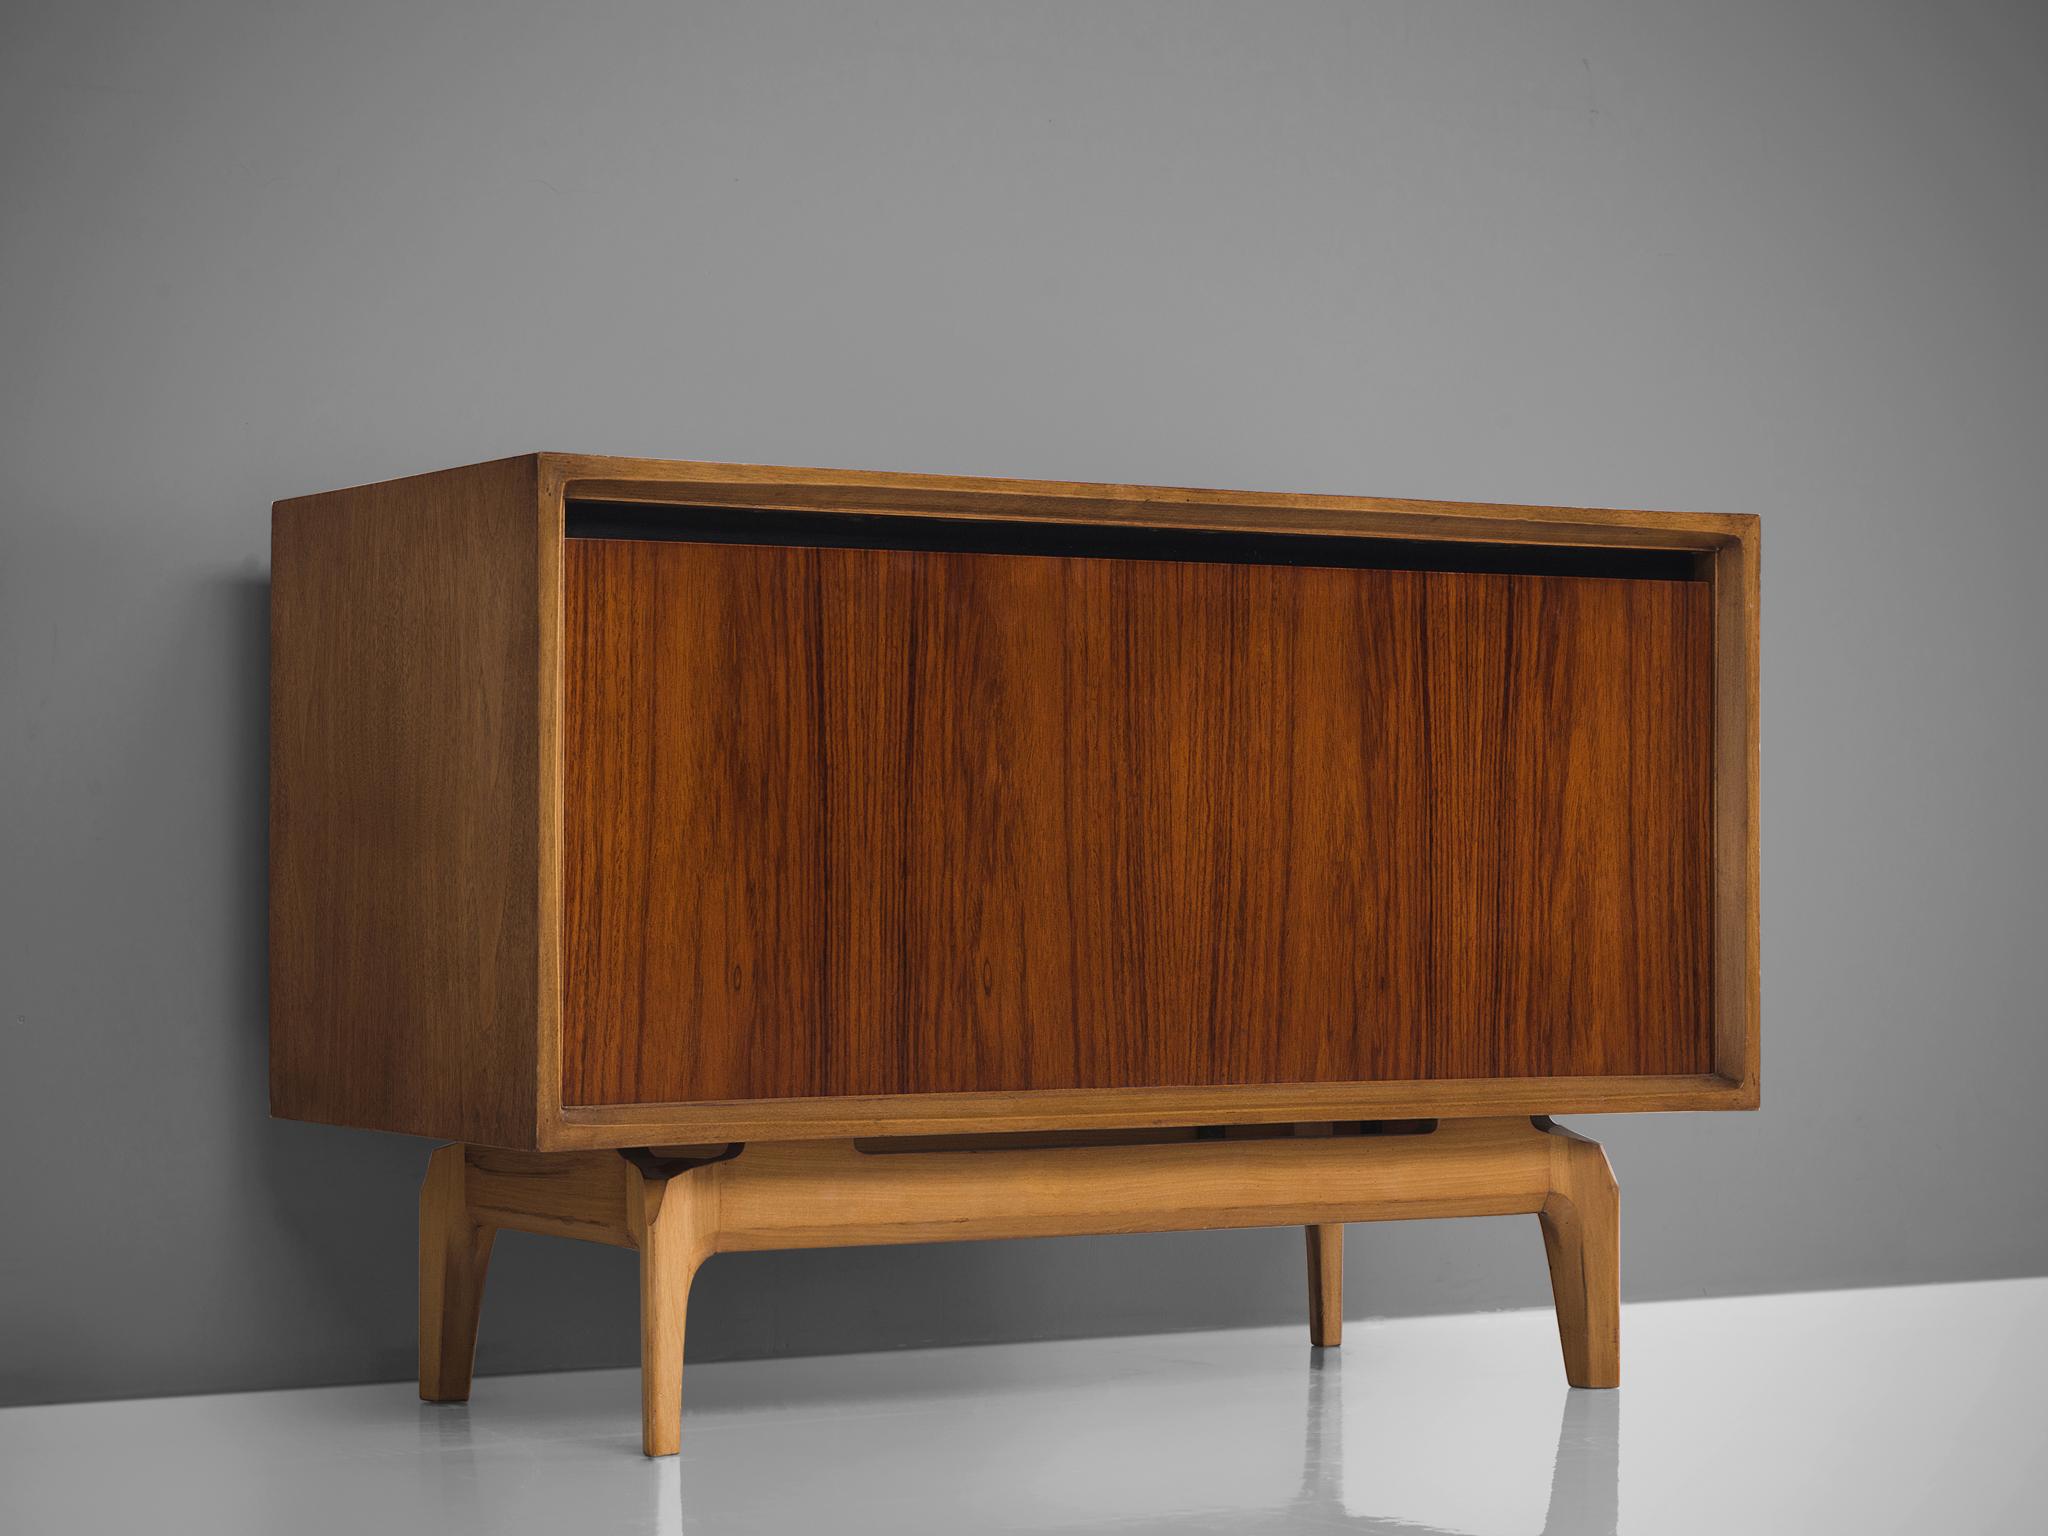 Fred Sandra attributed for De Coene, sideboard, rosewood and walnut, Belgium, 1958.

This sideboard is well-constructed and detailed in a discrete manner. Produced in rosewood and walnut. The piece shows well-designed lines and interesting details,